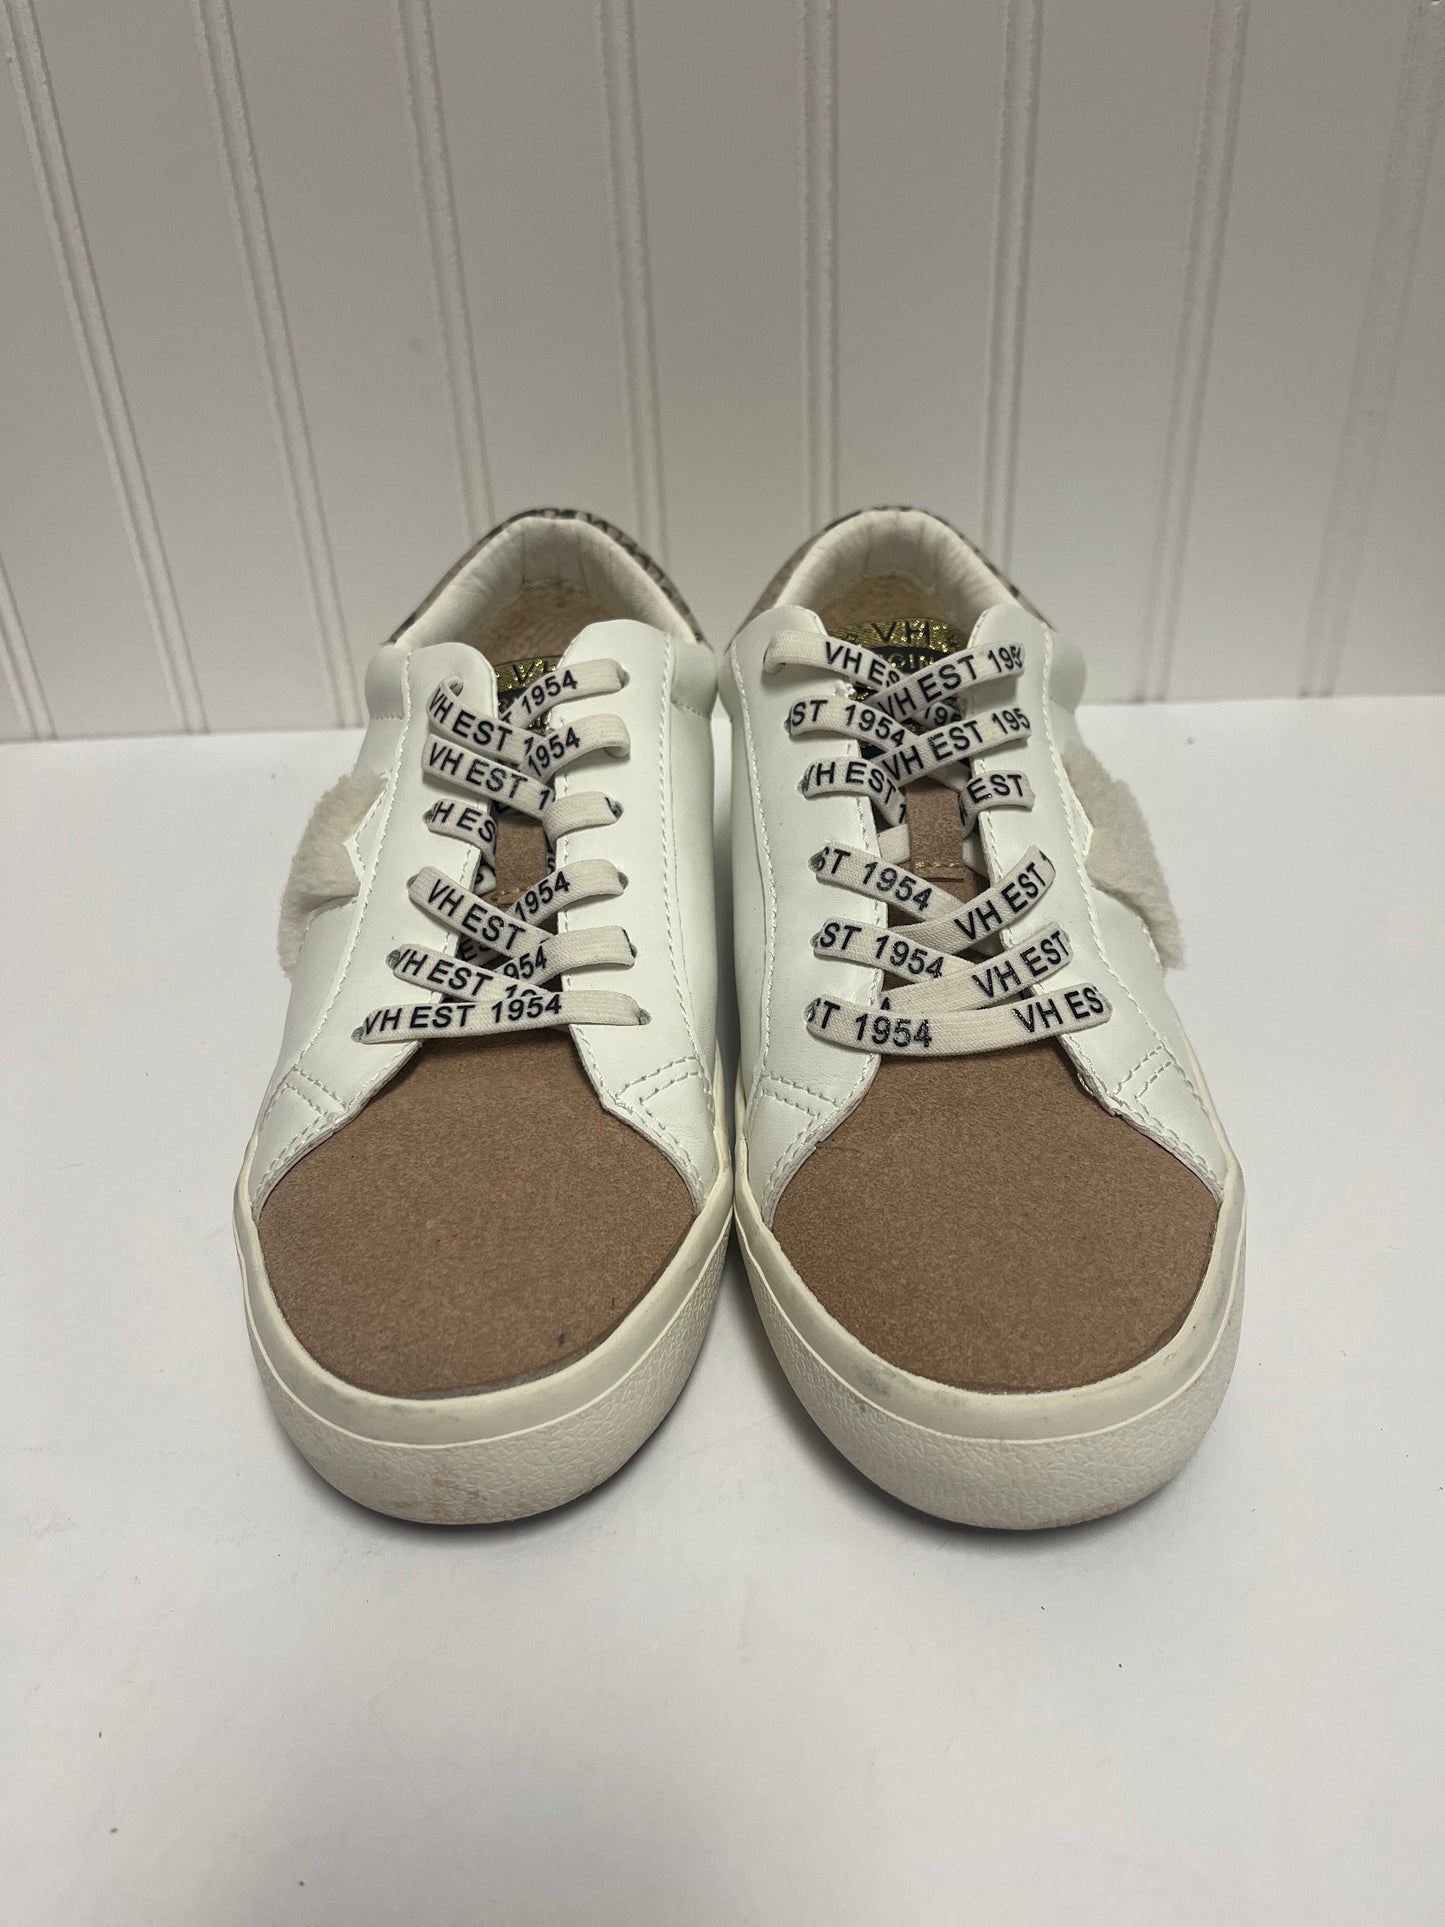 Shoes Sneakers By Vintage Havana  Size: 6